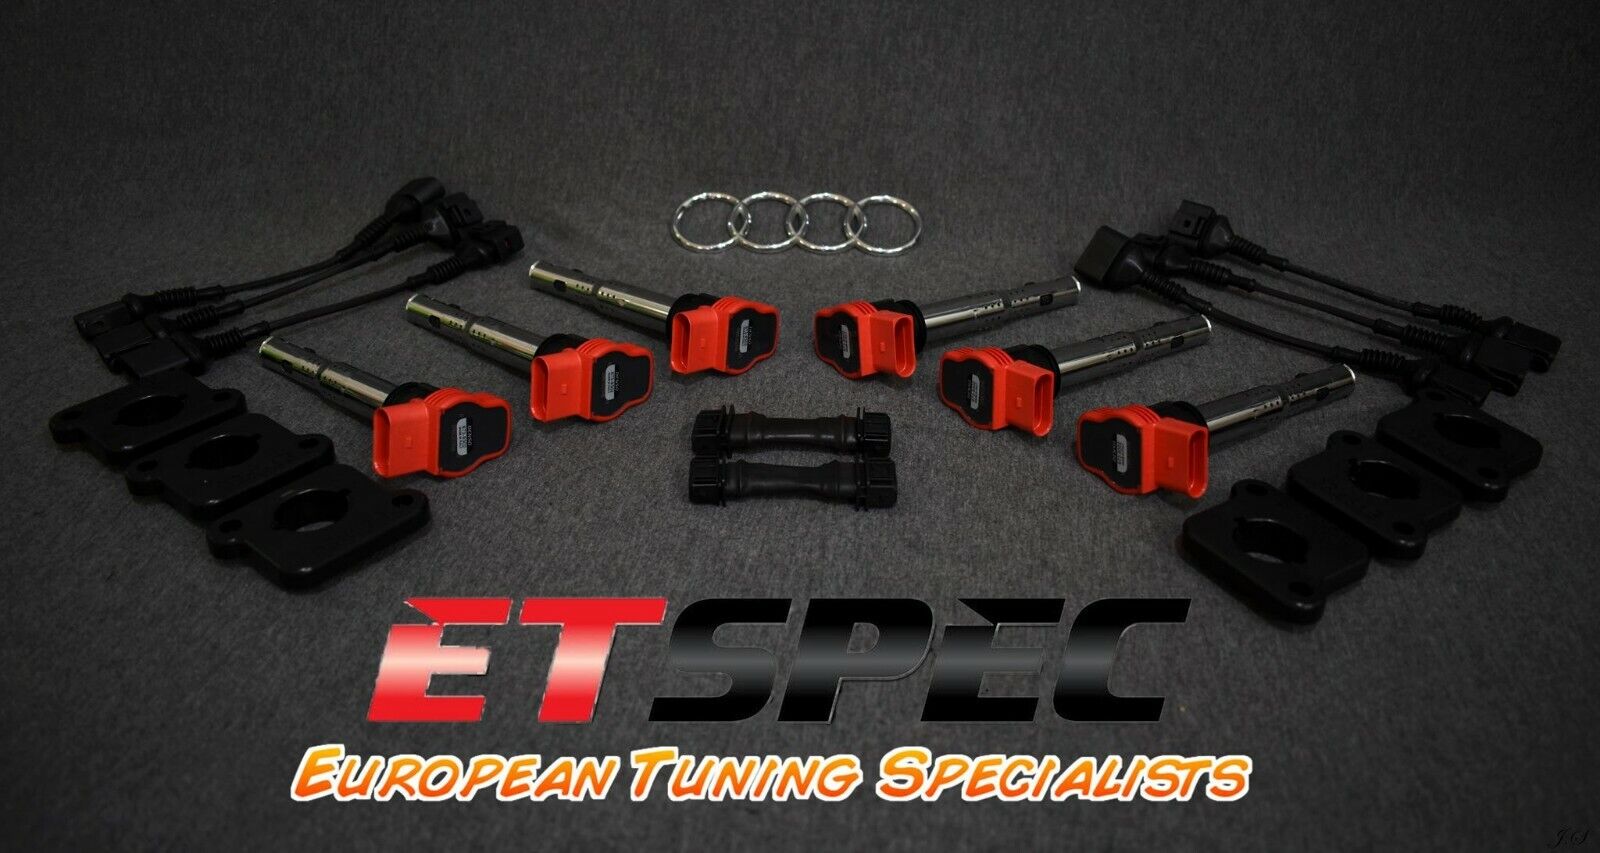 2000-2002 Audi S4 A6 / Allroad 2.7T R8 ignition coil pack conversion upgrade kit